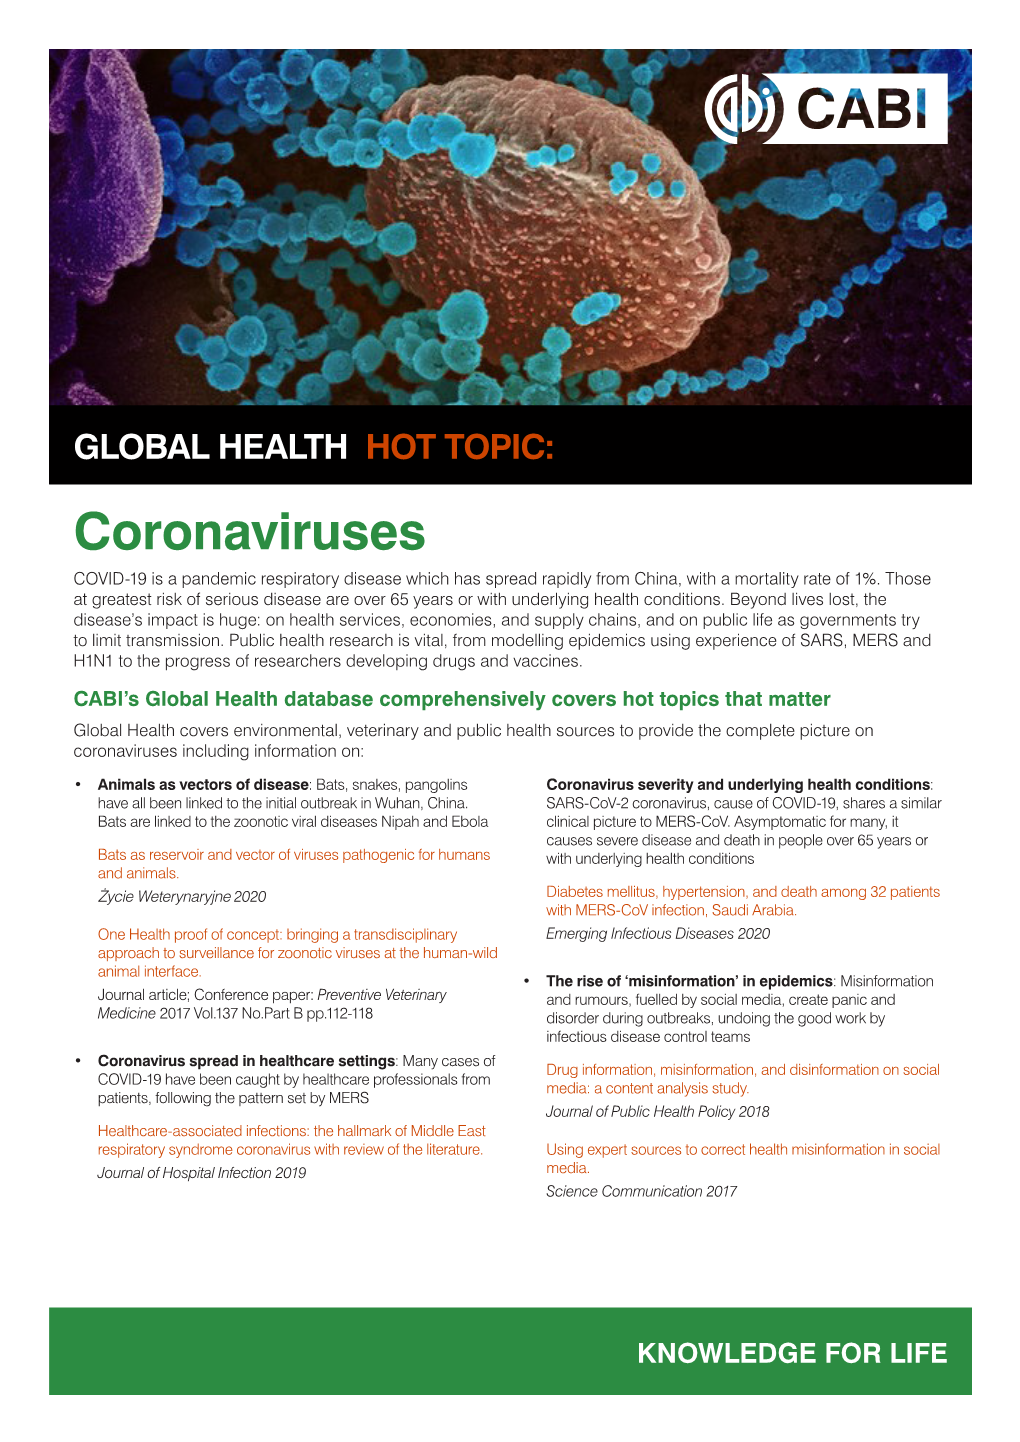 Coronaviruses COVID-19 Is a Pandemic Respiratory Disease Which Has Spread Rapidly from China, with a Mortality Rate of 1%